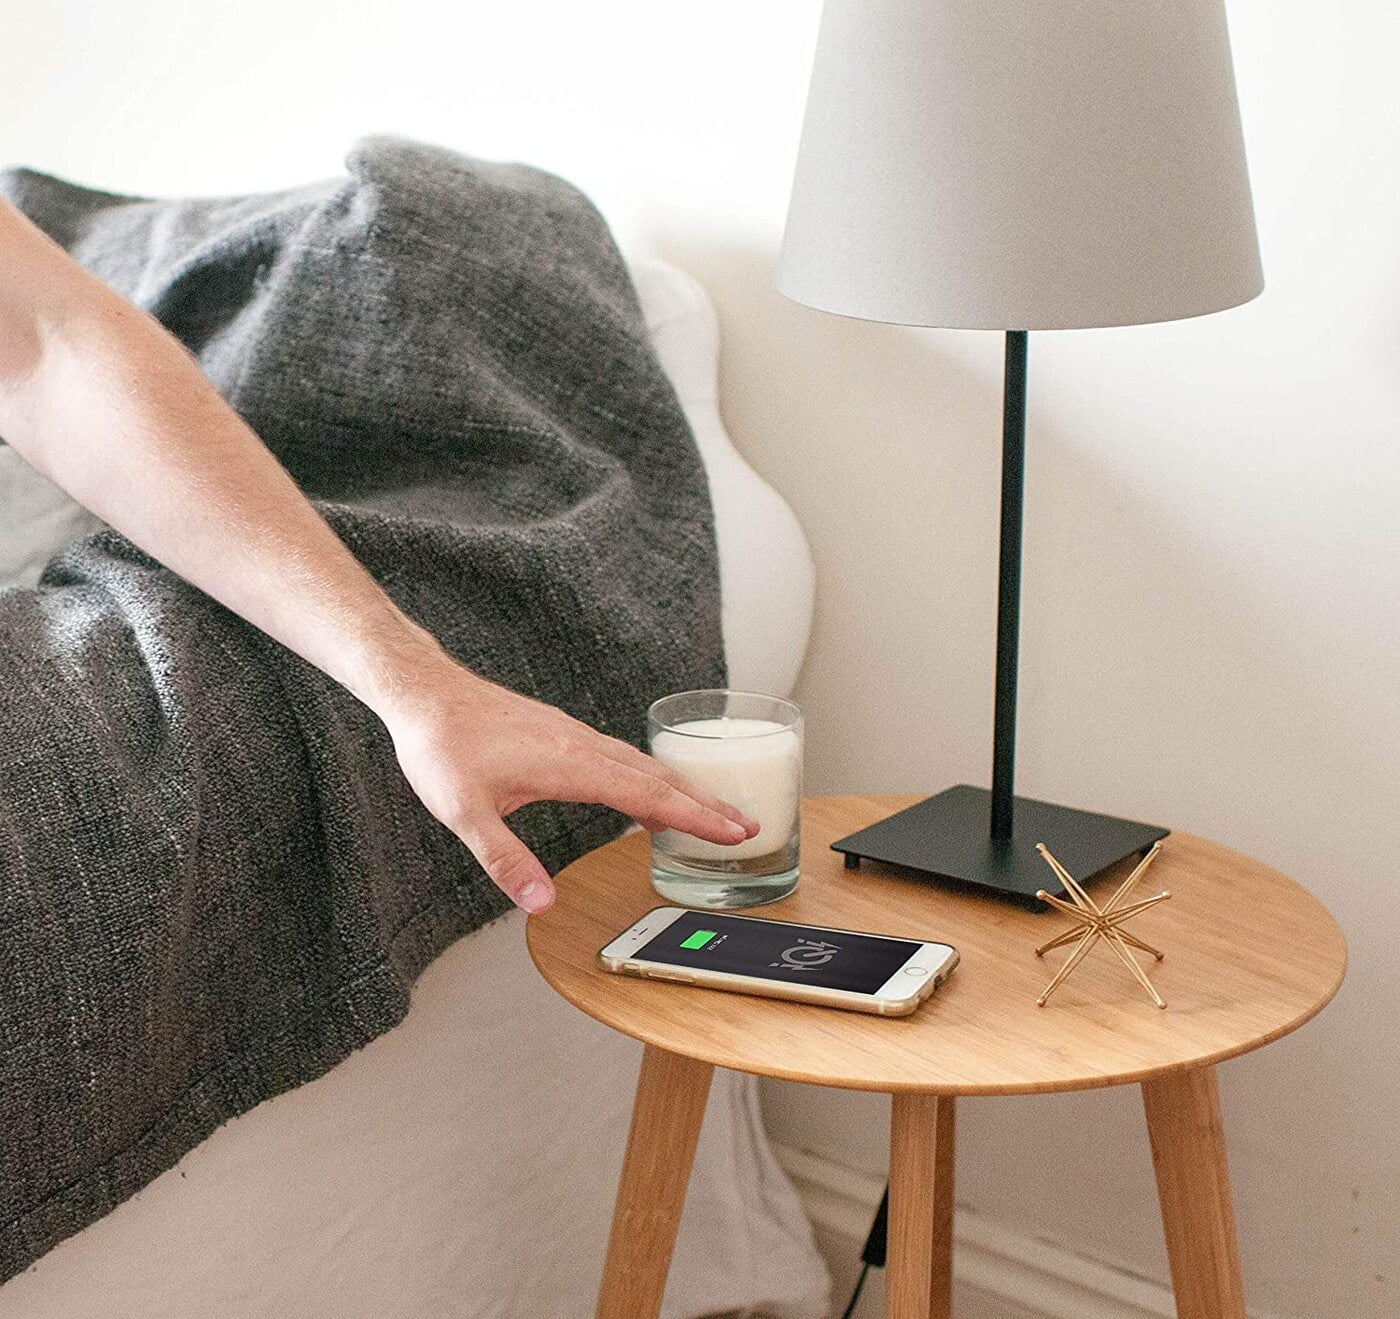 invisible-wireless-charger-for-mobiles-at-your-home-or-office